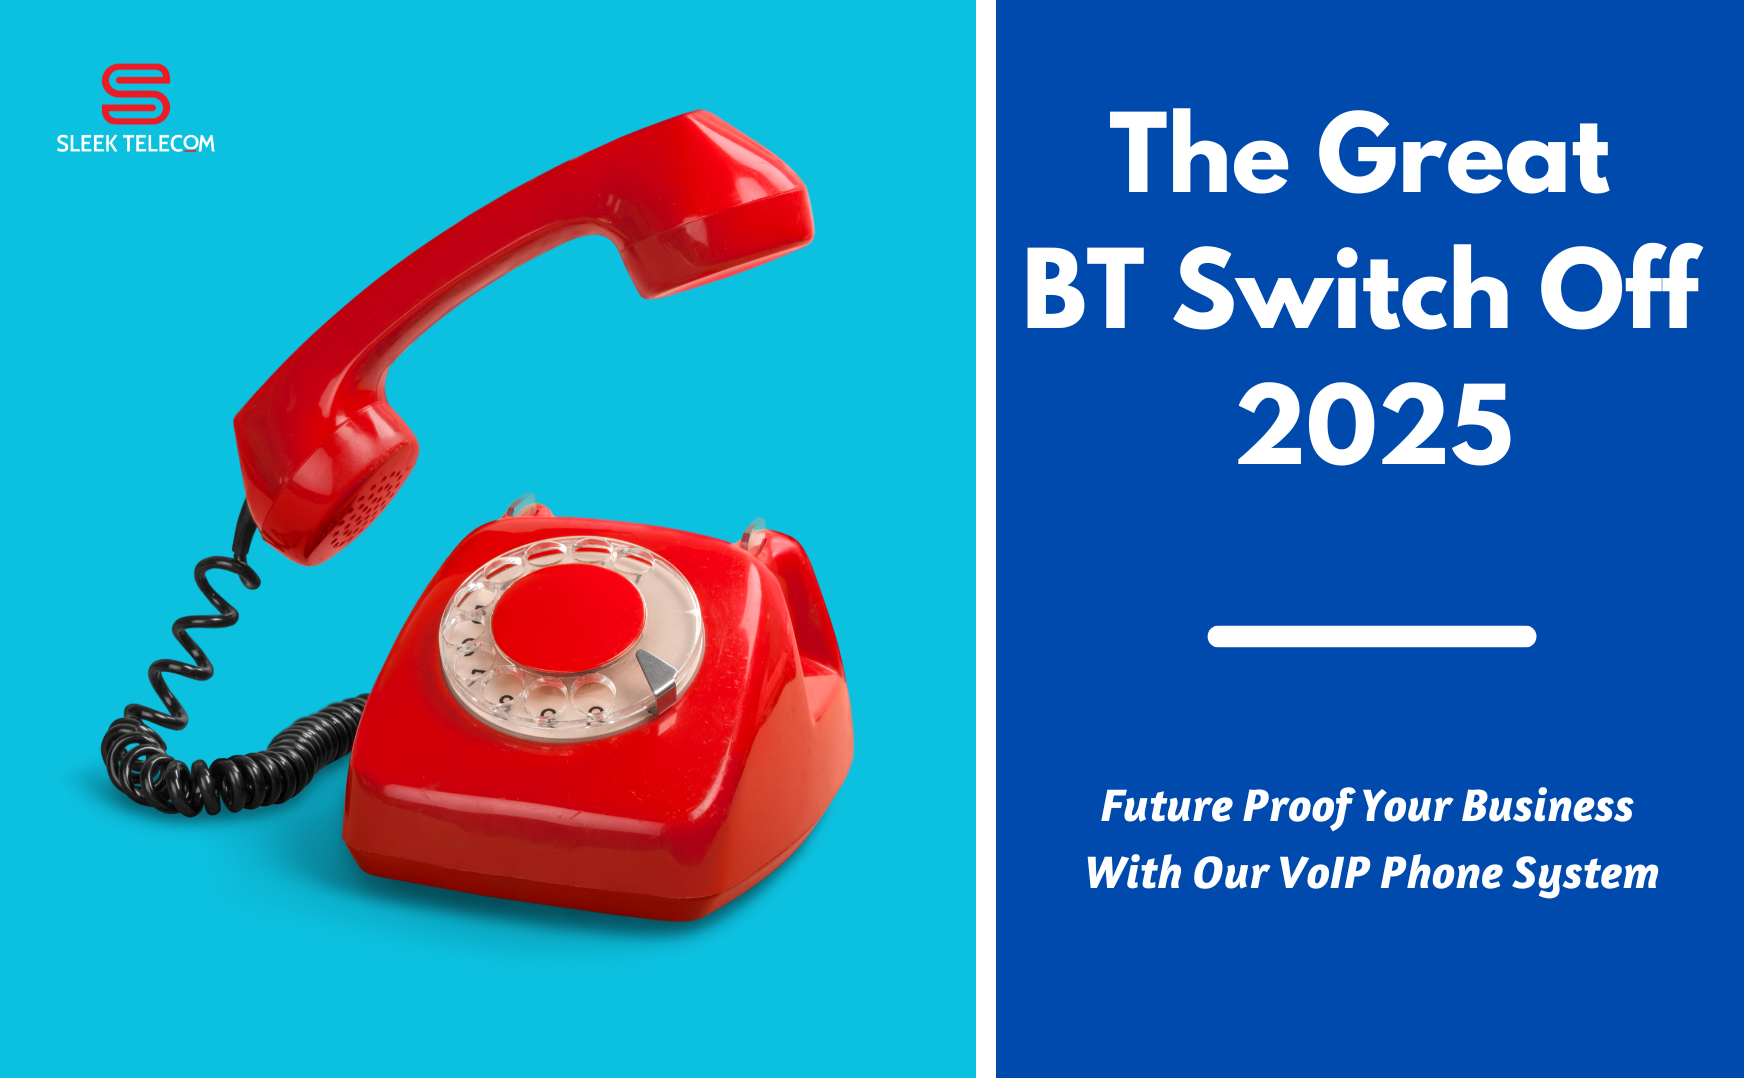 The great BT switch off 2025 - Switch from ISDN to VoIP